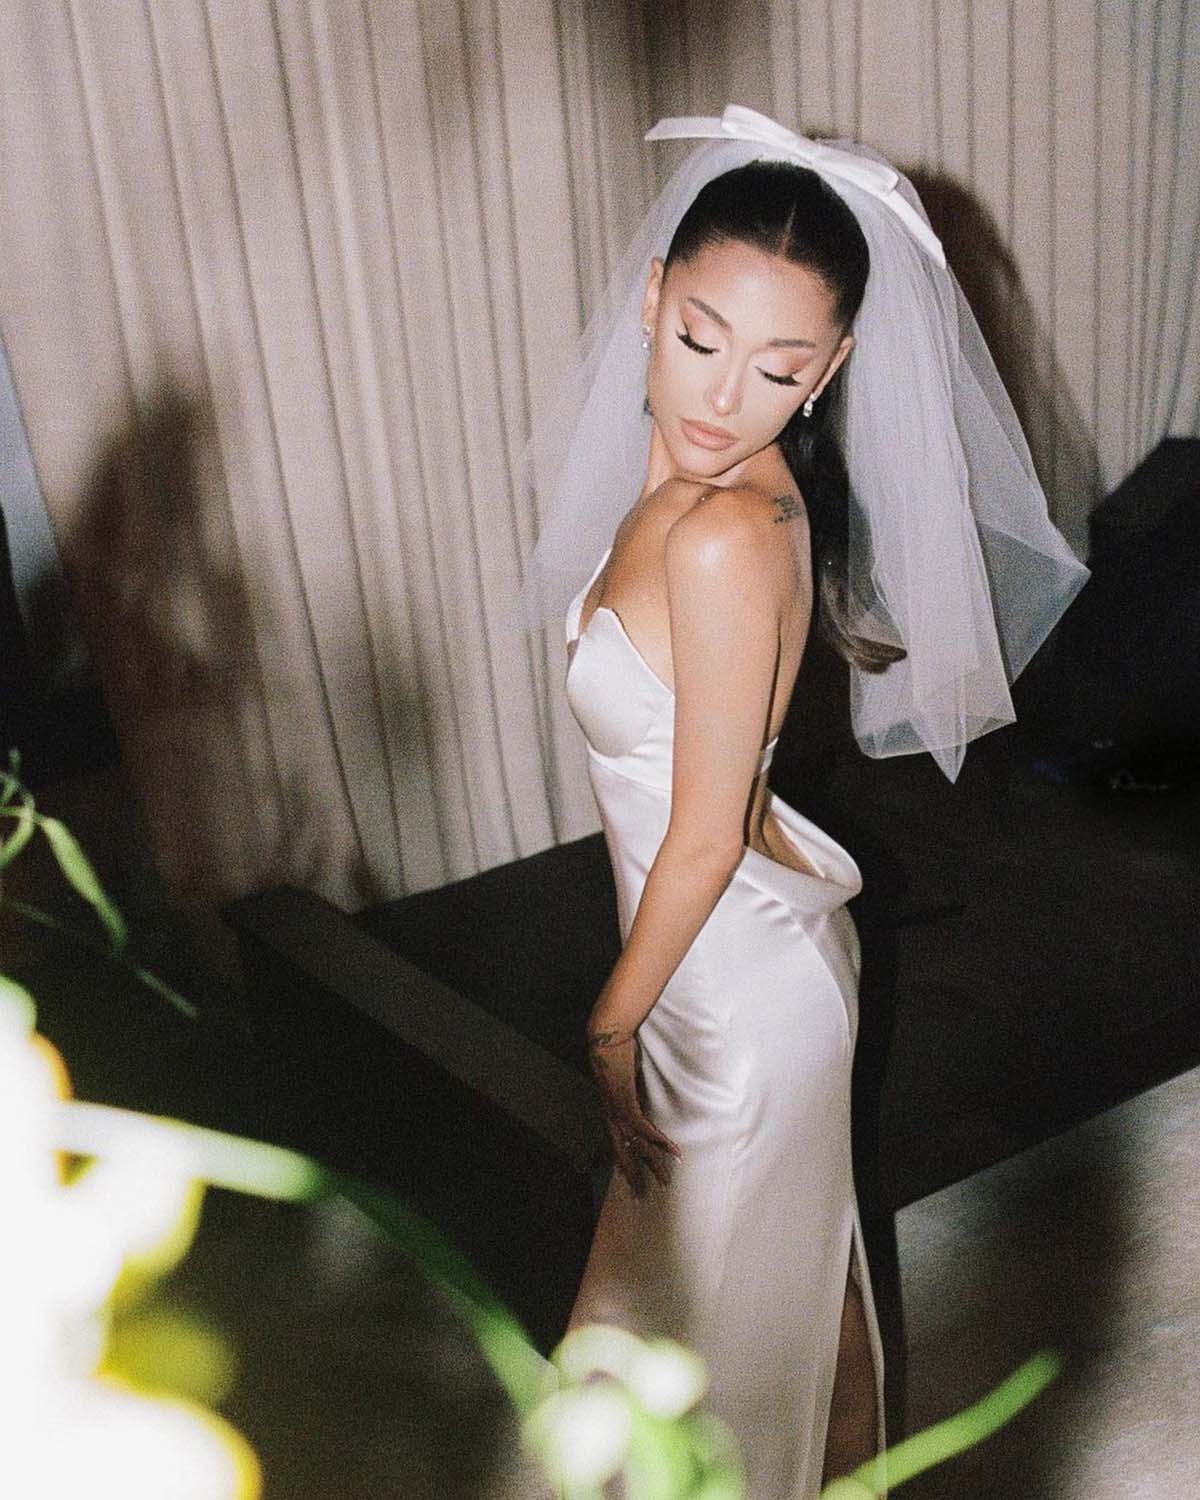 The Celebrity Wedding Dresses of 2019 That Made Our Jaws Drop